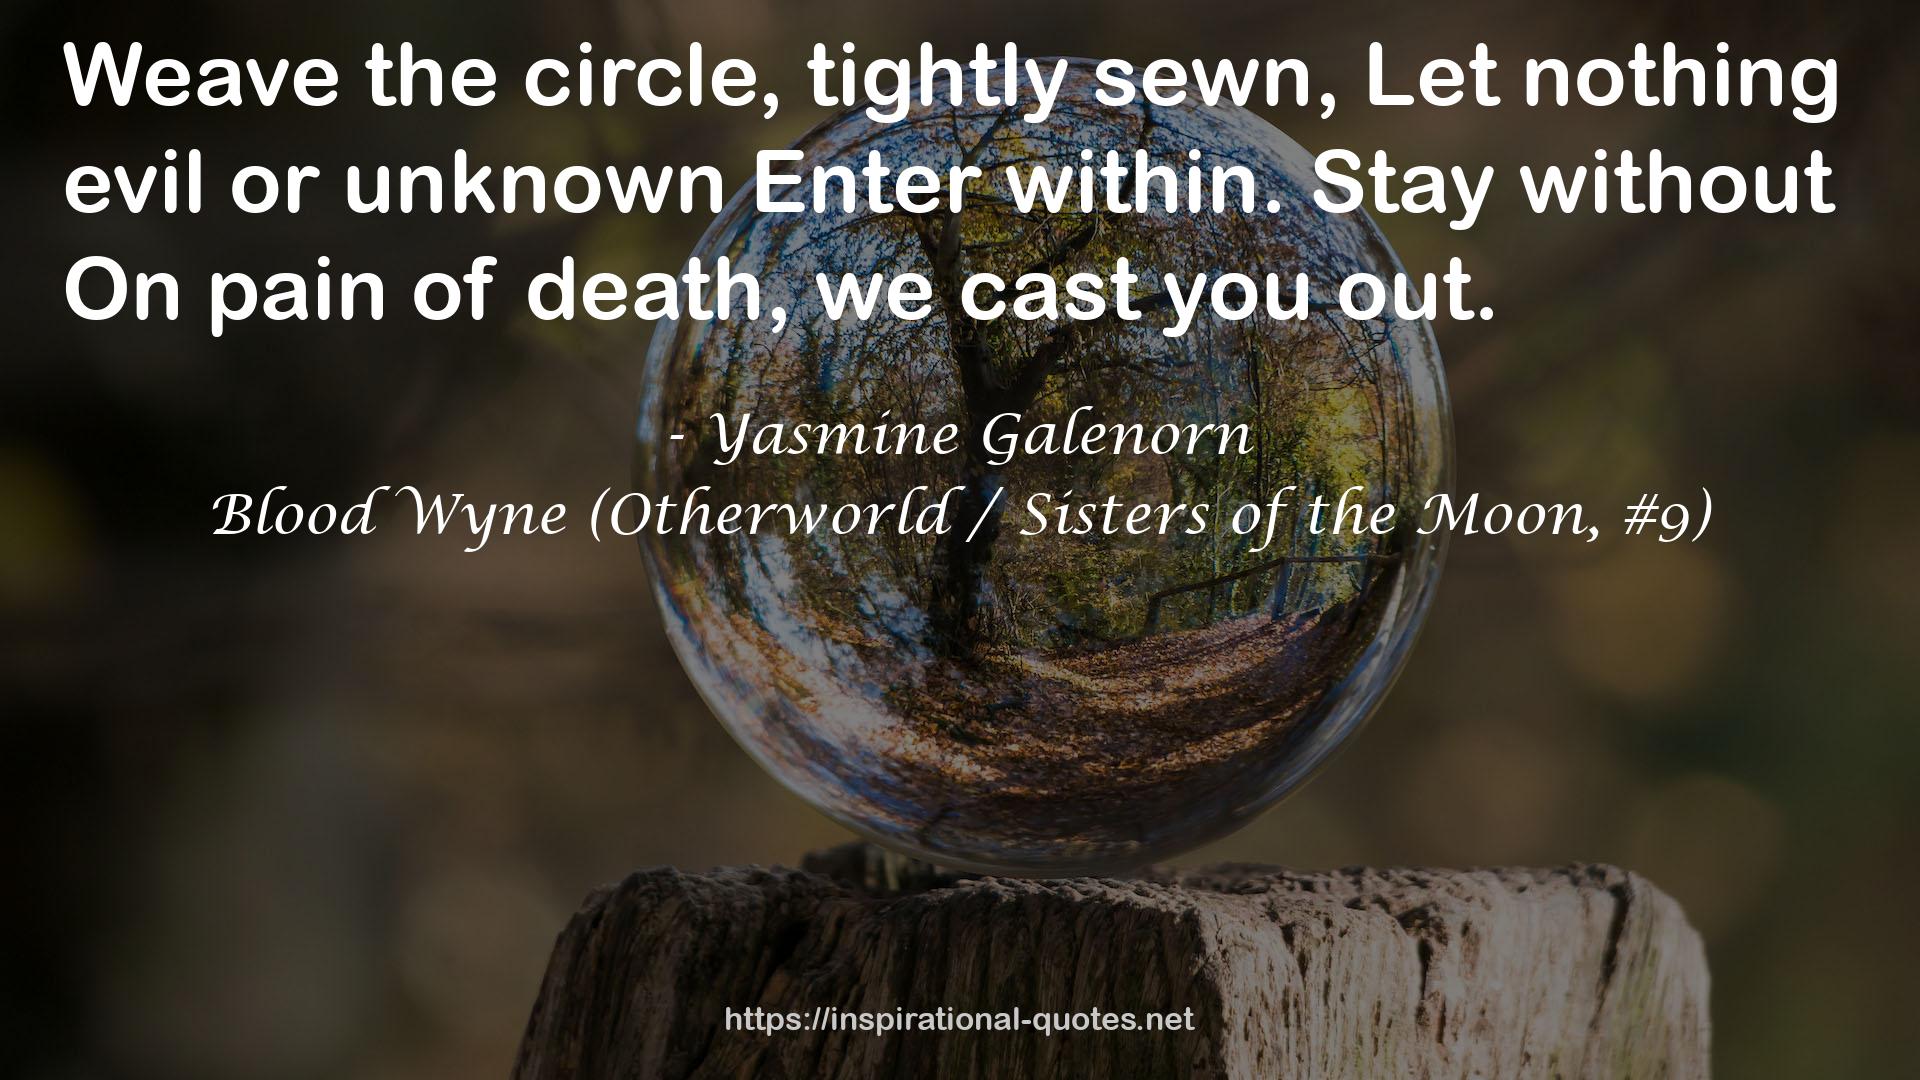 Blood Wyne (Otherworld / Sisters of the Moon, #9) QUOTES